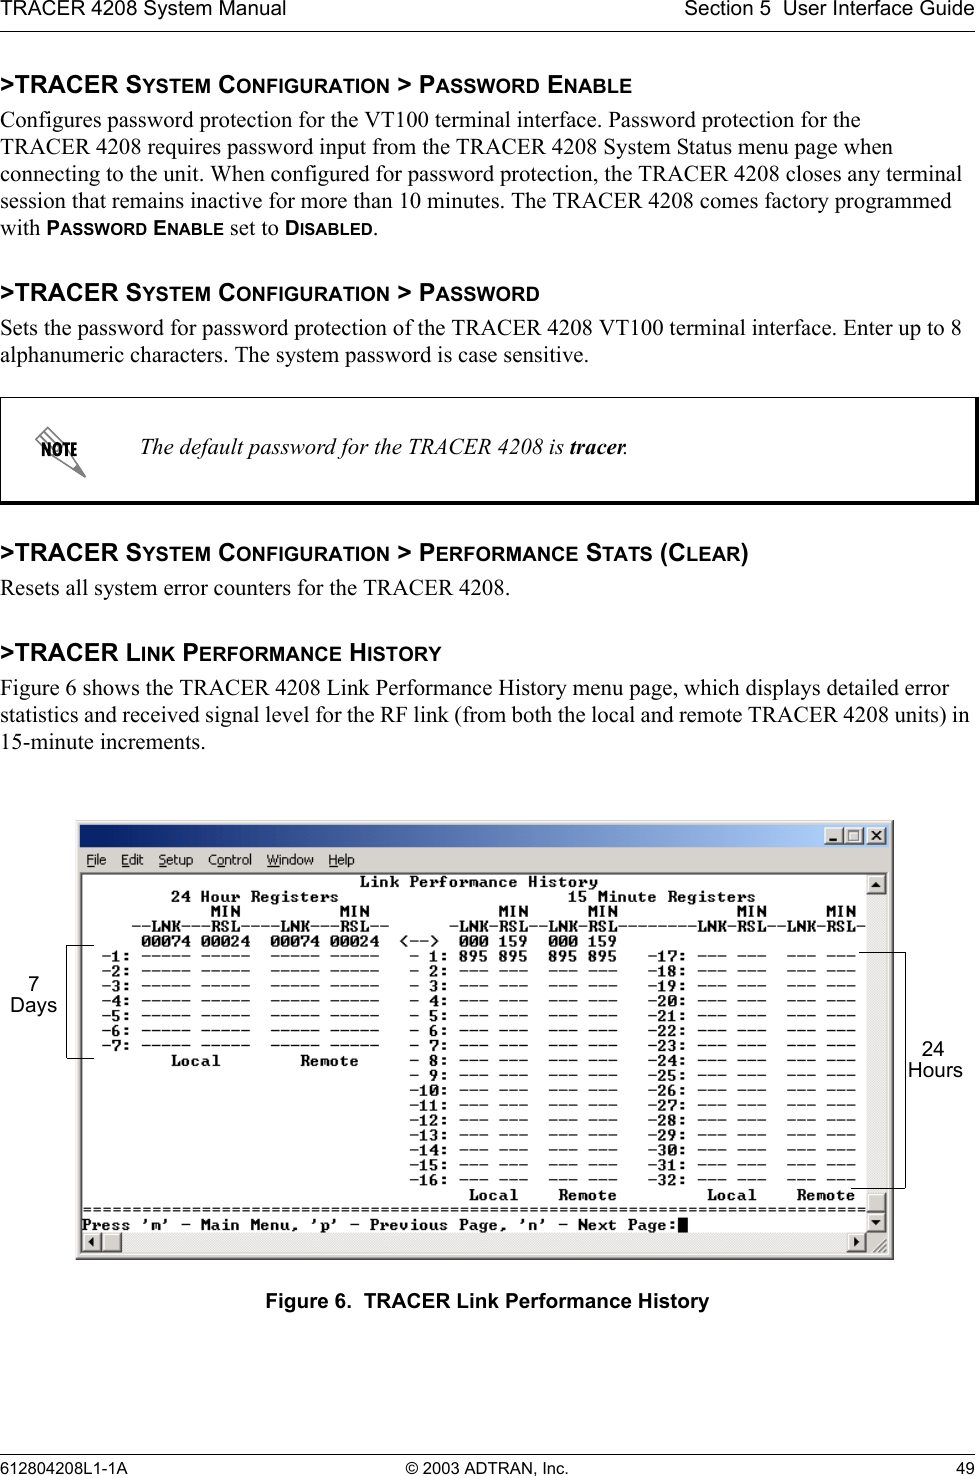 TRACER 4208 System Manual Section 5  User Interface Guide612804208L1-1A © 2003 ADTRAN, Inc. 49&gt;TRACER SYSTEM CONFIGURATION &gt; PASSWORD ENABLEConfigures password protection for the VT100 terminal interface. Password protection for the TRACER 4208 requires password input from the TRACER 4208 System Status menu page when connecting to the unit. When configured for password protection, the TRACER 4208 closes any terminal session that remains inactive for more than 10 minutes. The TRACER 4208 comes factory programmed with PASSWORD ENABLE set to DISABLED. &gt;TRACER SYSTEM CONFIGURATION &gt; PASSWORDSets the password for password protection of the TRACER 4208 VT100 terminal interface. Enter up to 8 alphanumeric characters. The system password is case sensitive.&gt;TRACER SYSTEM CONFIGURATION &gt; PERFORMANCE STATS (CLEAR)Resets all system error counters for the TRACER 4208.&gt;TRACER LINK PERFORMANCE HISTORYFigure 6 shows the TRACER 4208 Link Performance History menu page, which displays detailed error statistics and received signal level for the RF link (from both the local and remote TRACER 4208 units) in 15-minute increments. Figure 6.  TRACER Link Performance HistoryThe default password for the TRACER 4208 is tracer.24 Hours7 Days